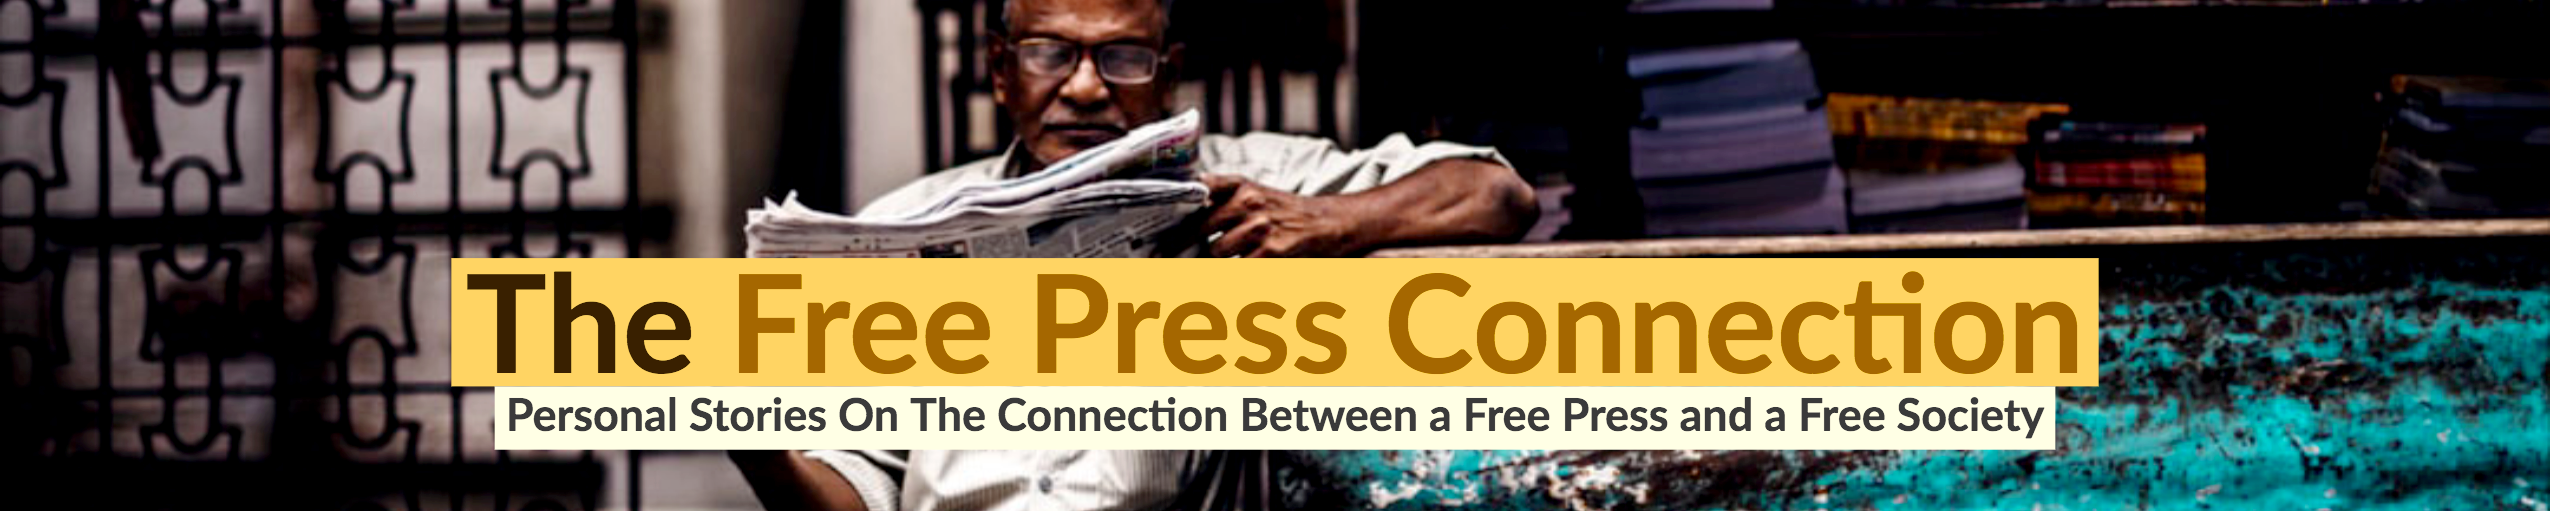 The Free Press Connection